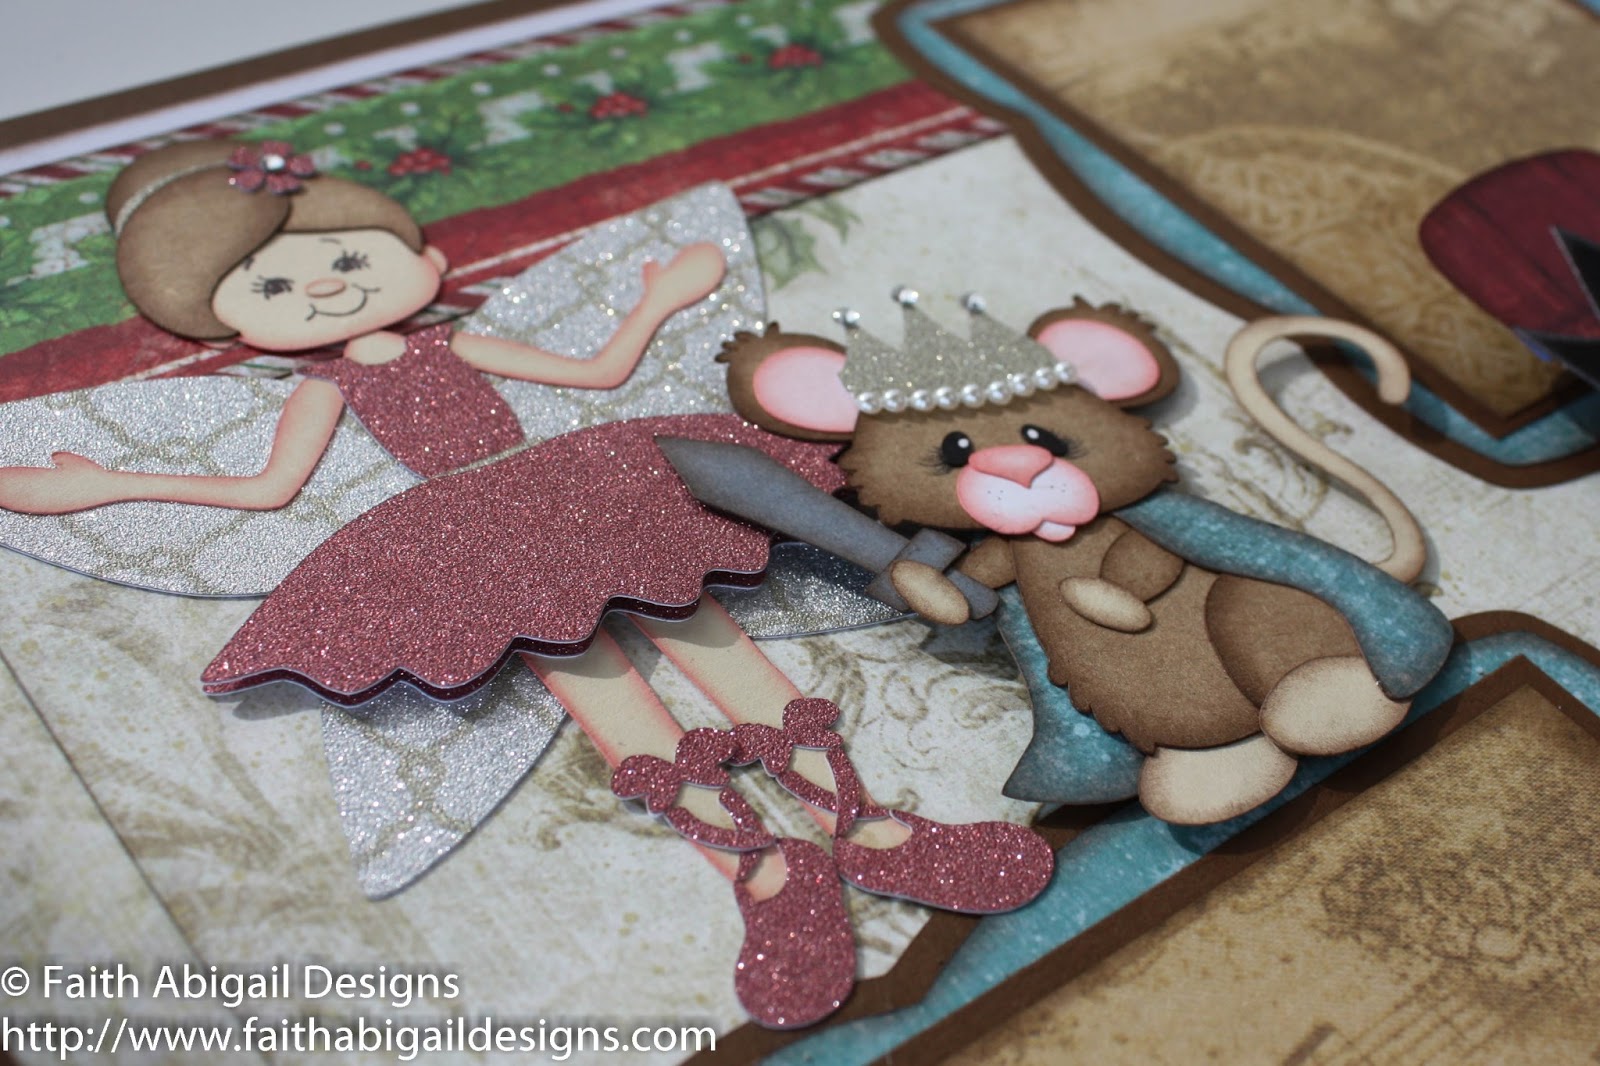 ... embellished my paper piecings with tiny rhinestone gems and pearls